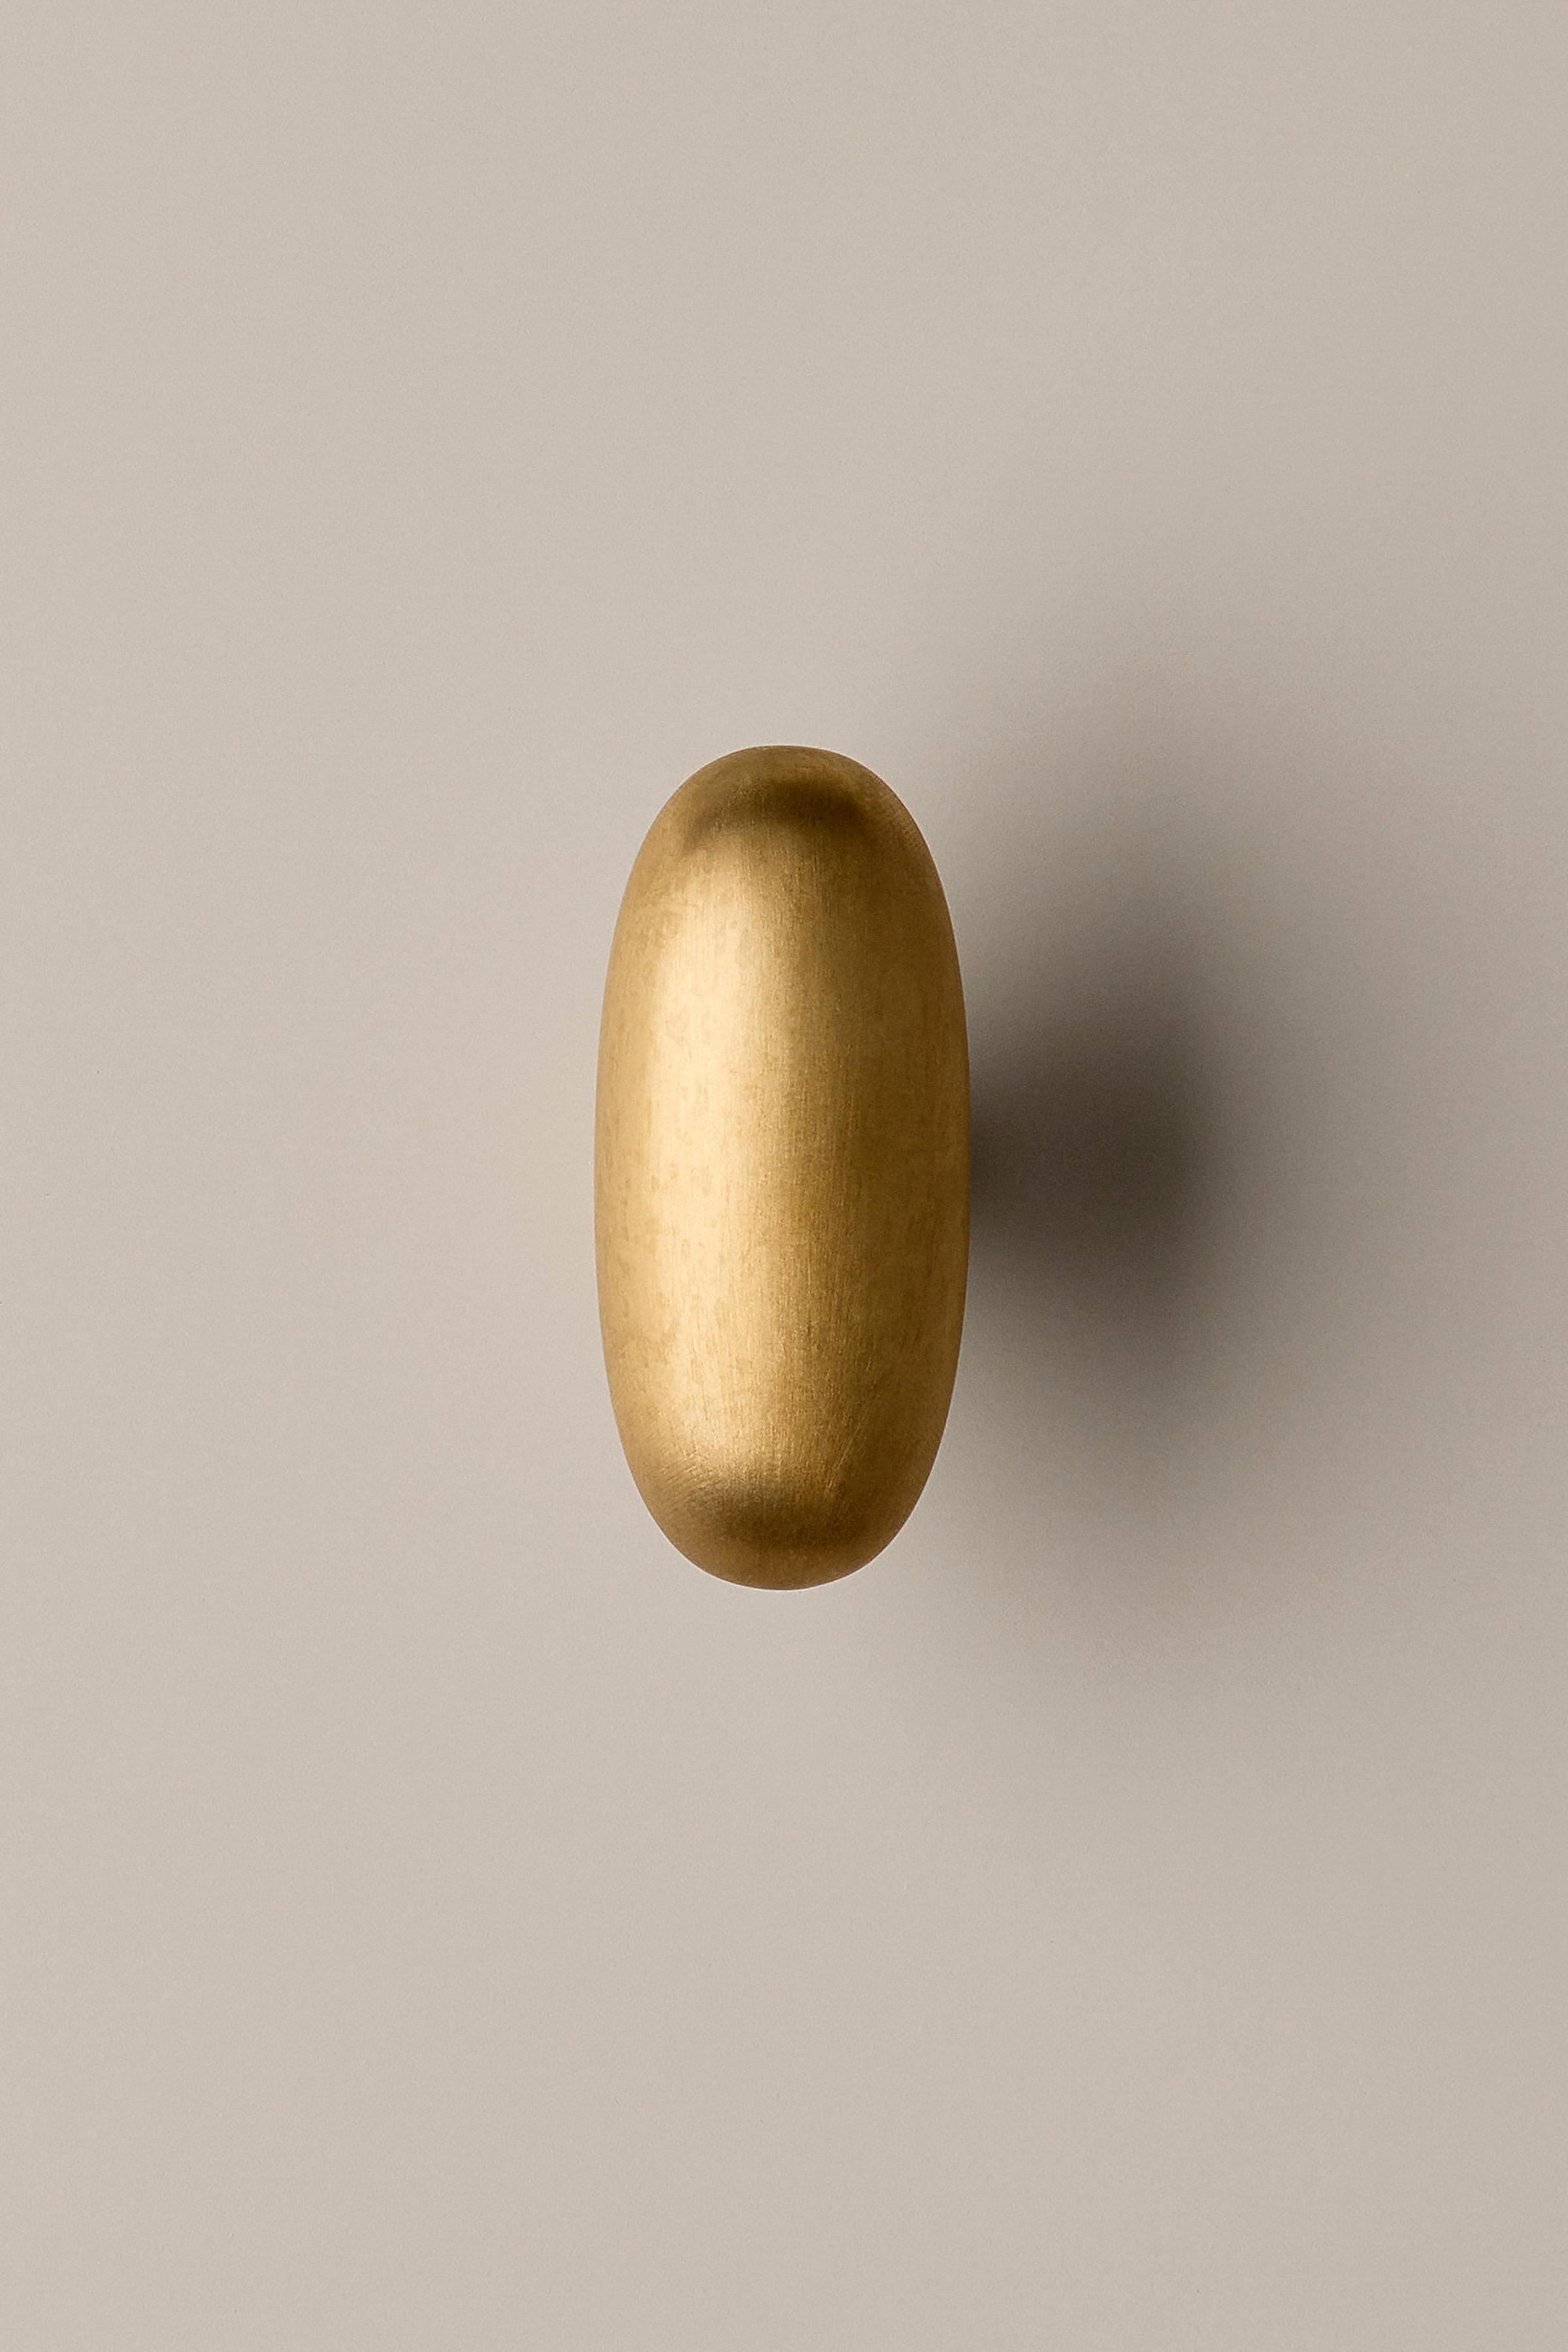 Door Handle / Knob 'Blunt' by Spaces Within, Amber Brass

Dimensions mm: 40 x 20 x 32
Weight: 98 g

A harmoniously balanced oval, BLUNT is pure, essential and confident. A classical yet refined knob with a sense of ease that will suit many spaces.